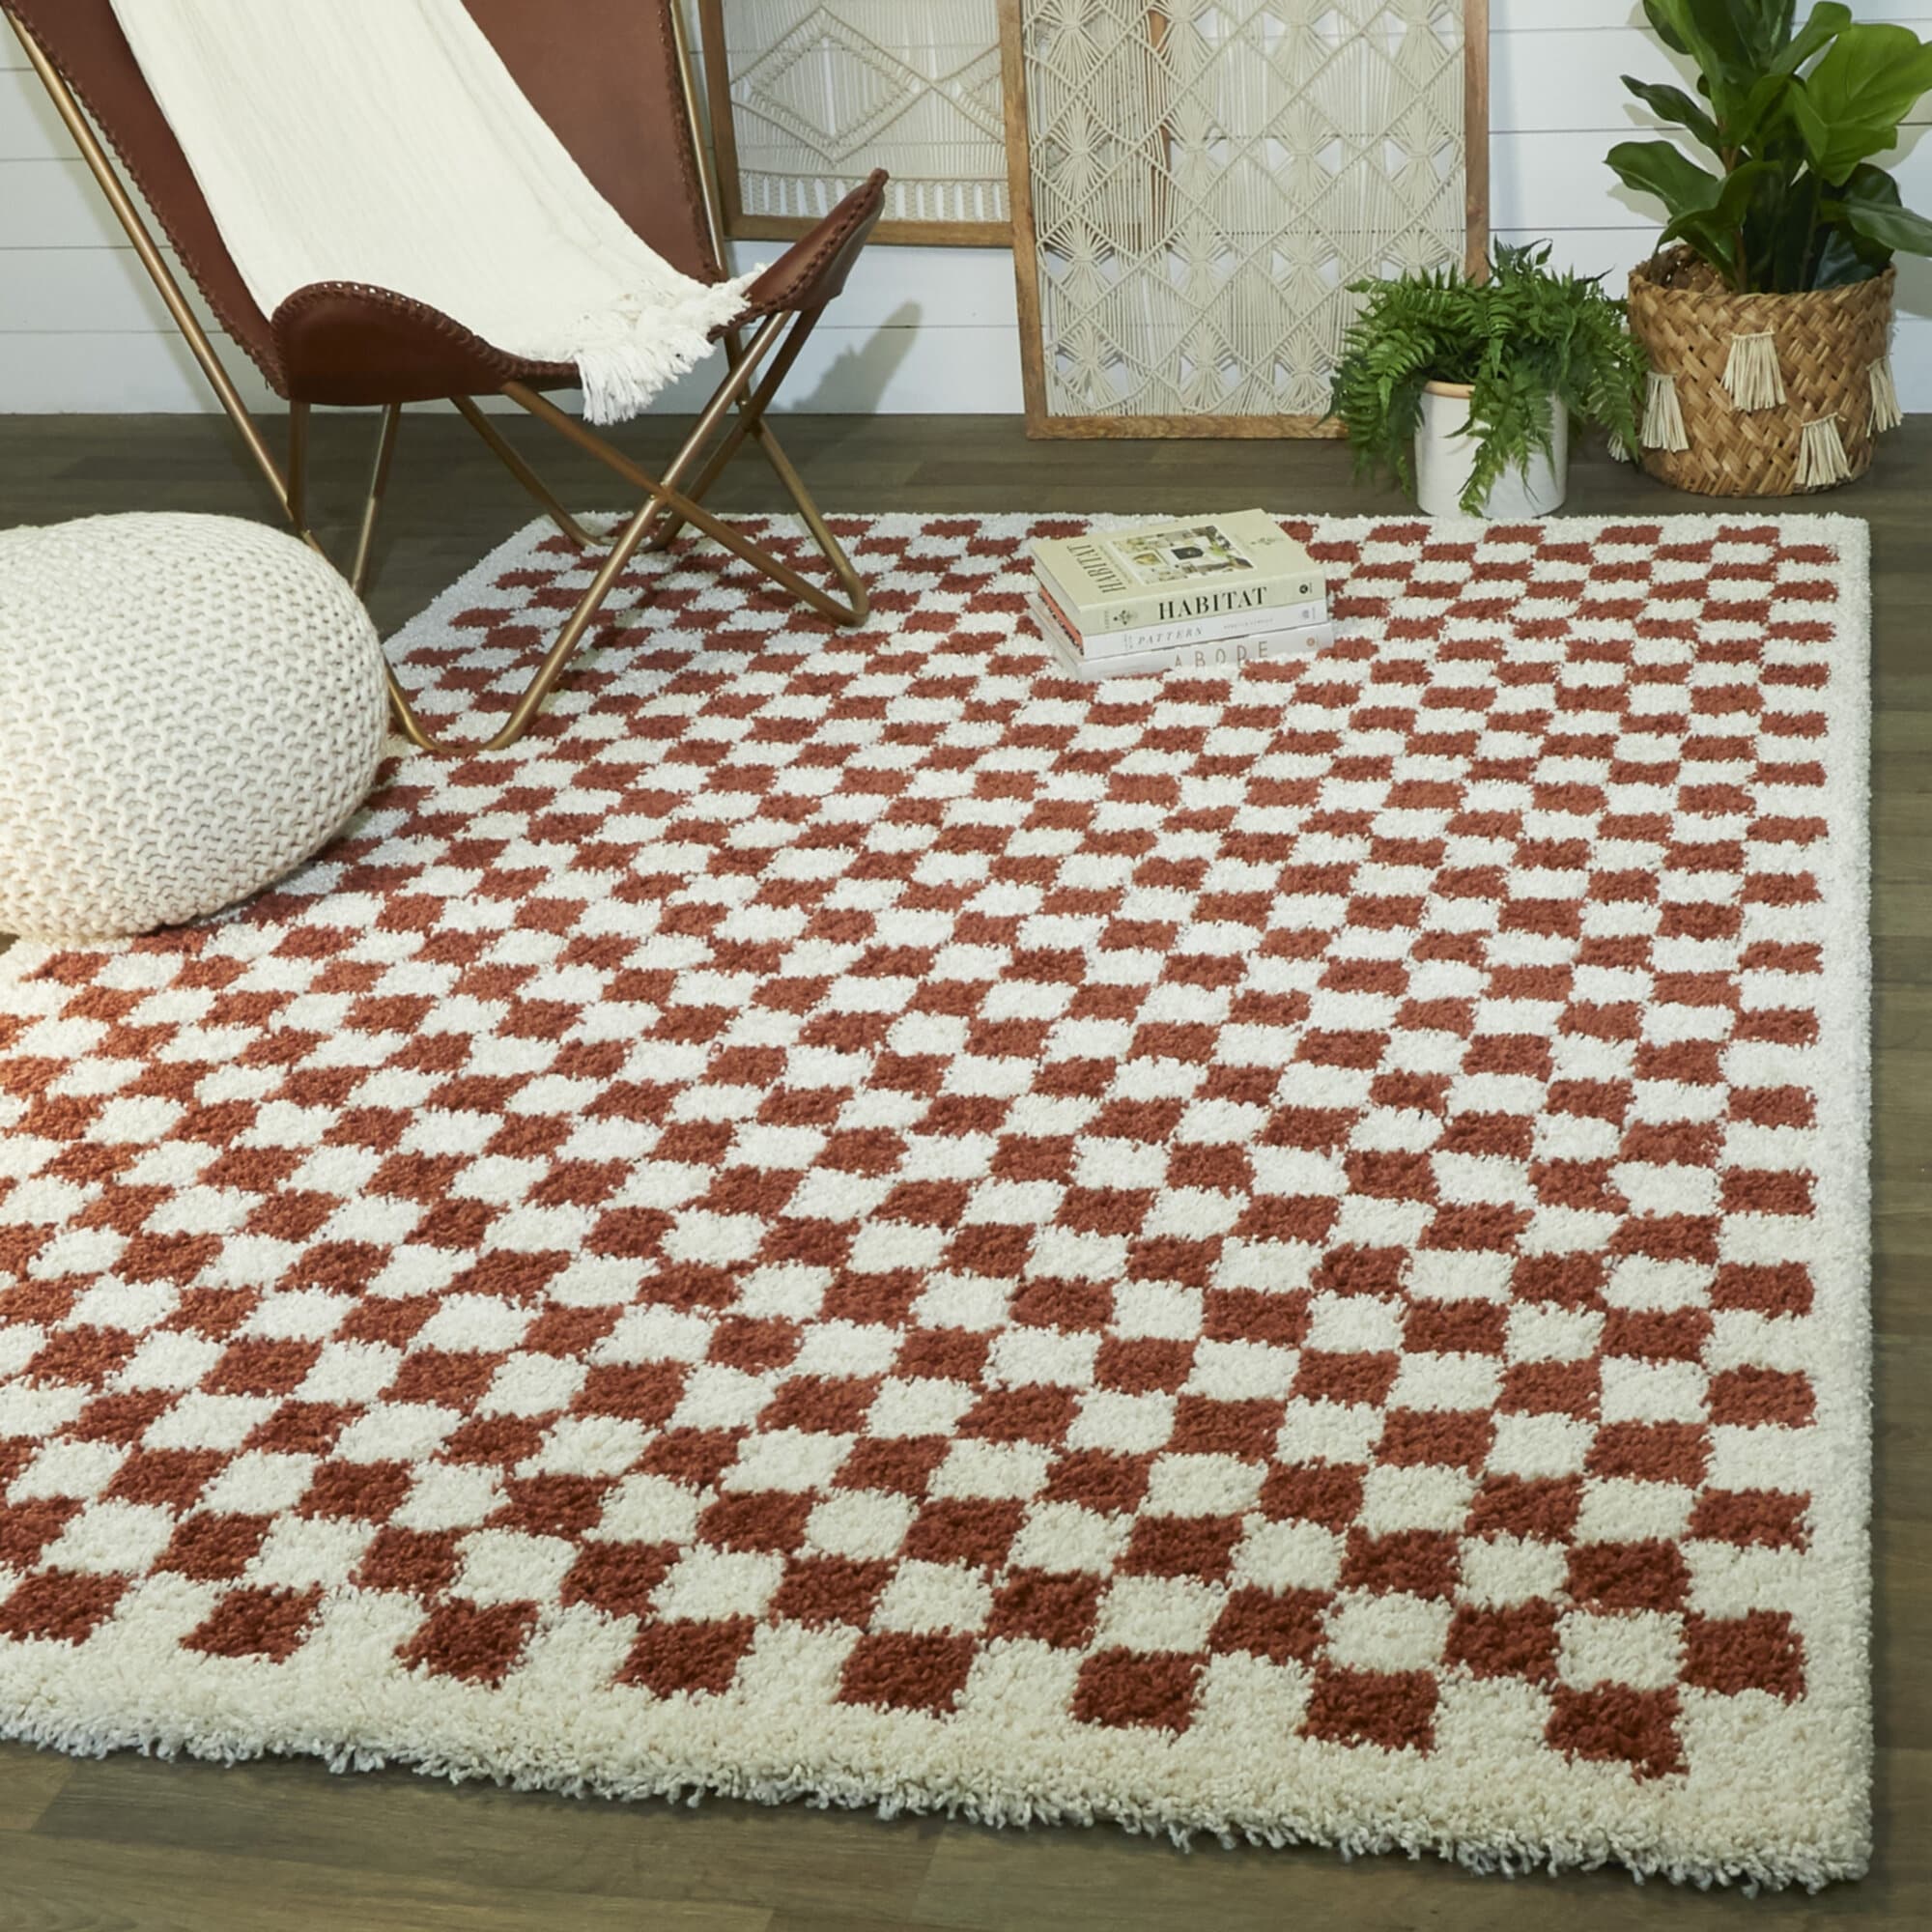 https://ak1.ostkcdn.com/images/products/is/images/direct/858336bec10fadf8b7565617d782c69c34f1f3f6/Covey-Plush-Checkered-Thick-Shag-Area-Rug.jpg